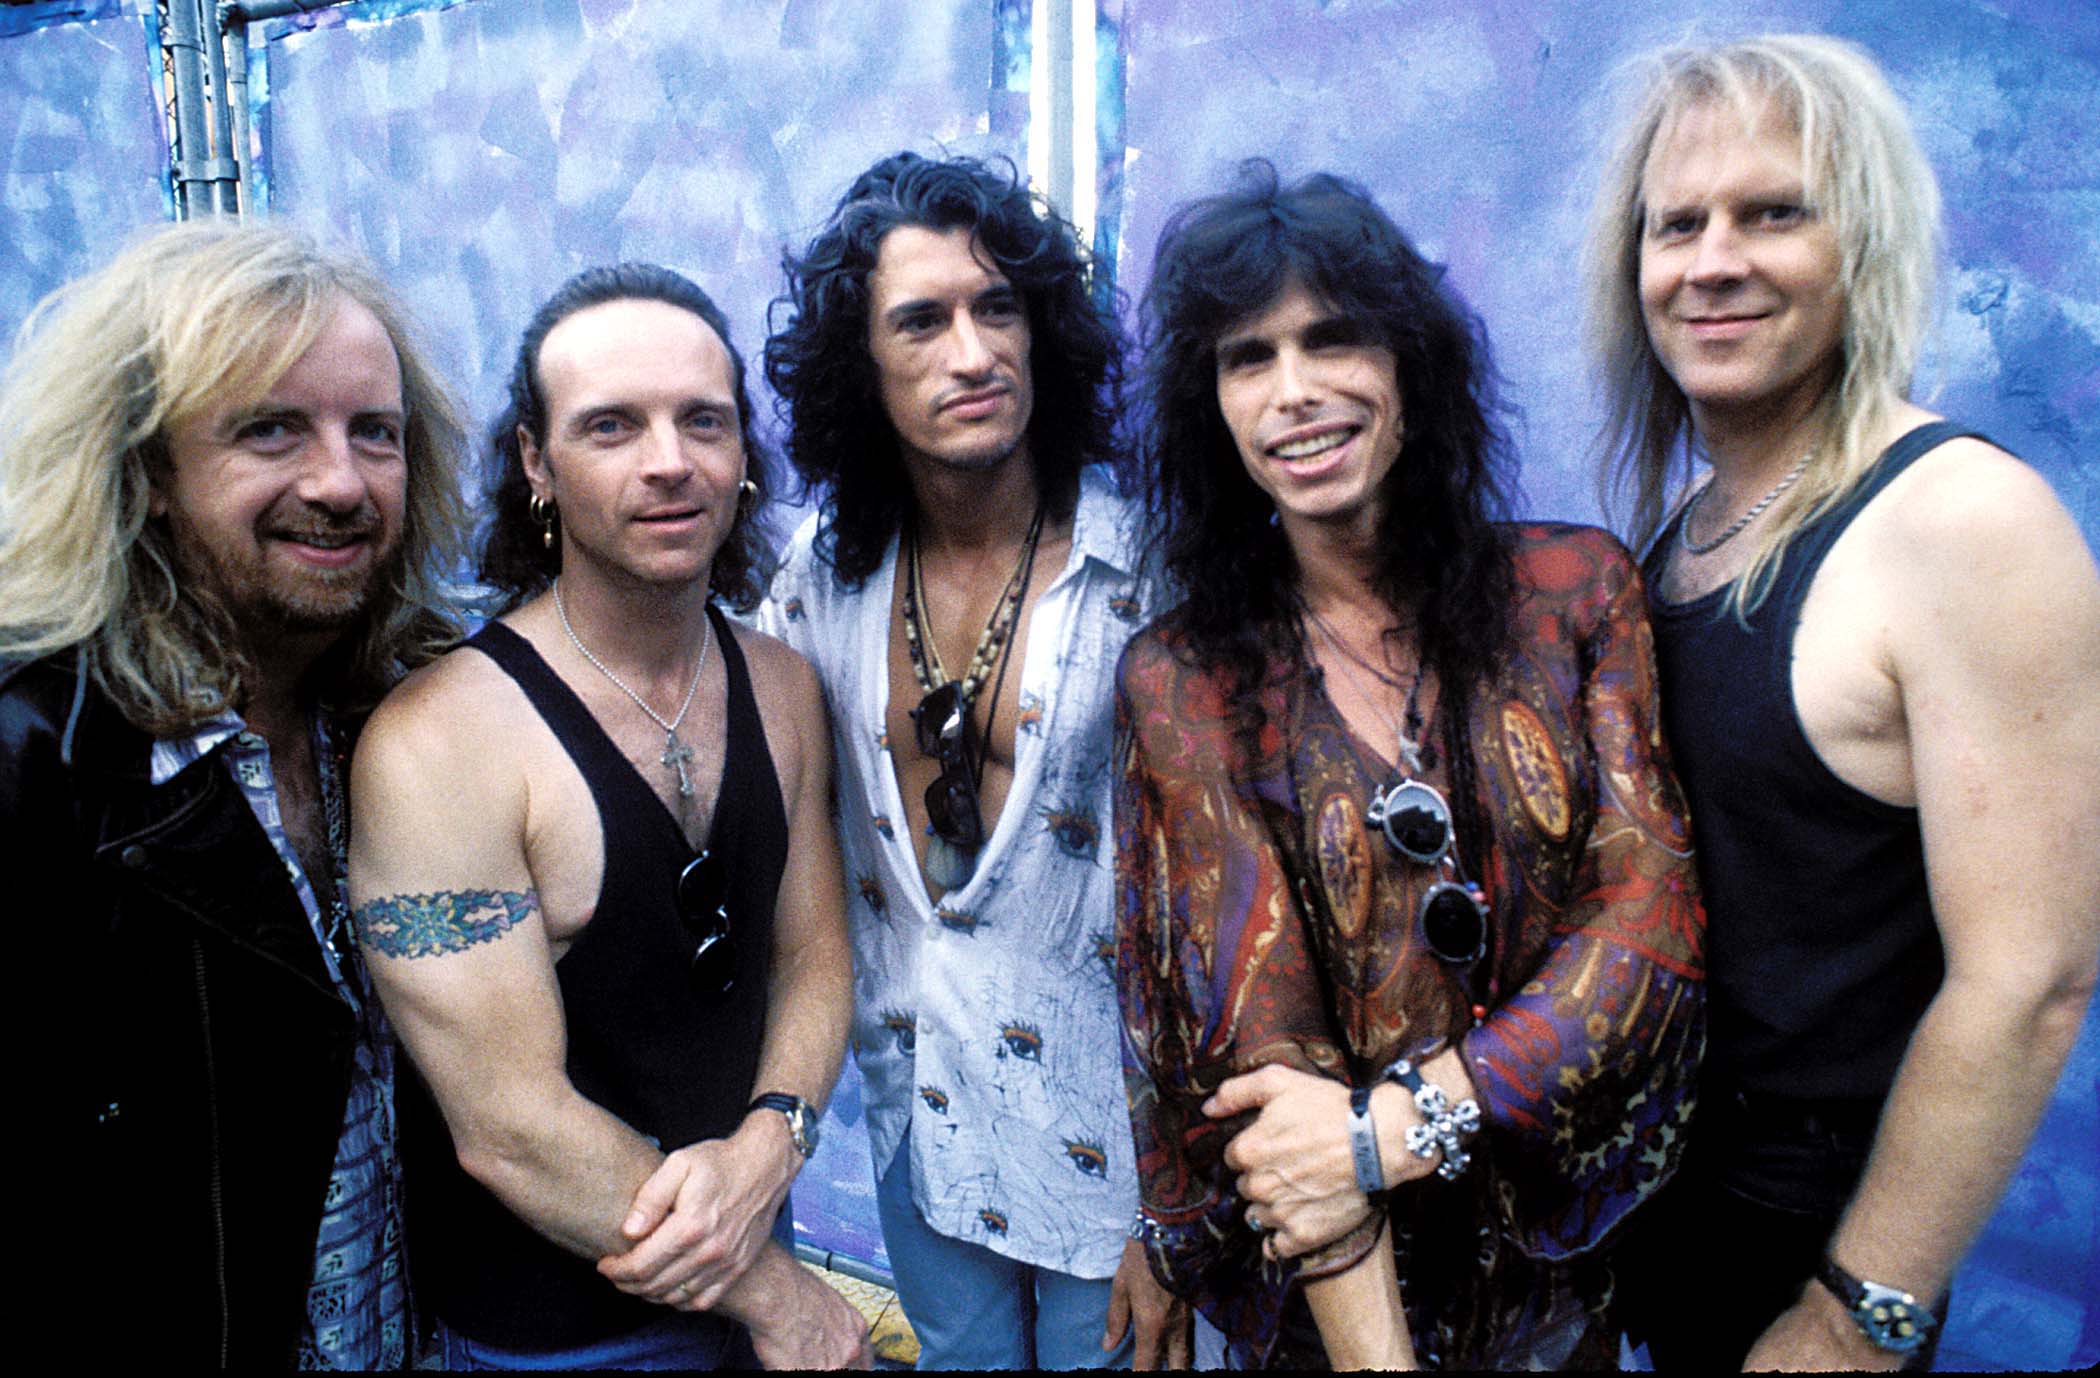 Aerosmith in front of a metal barrier